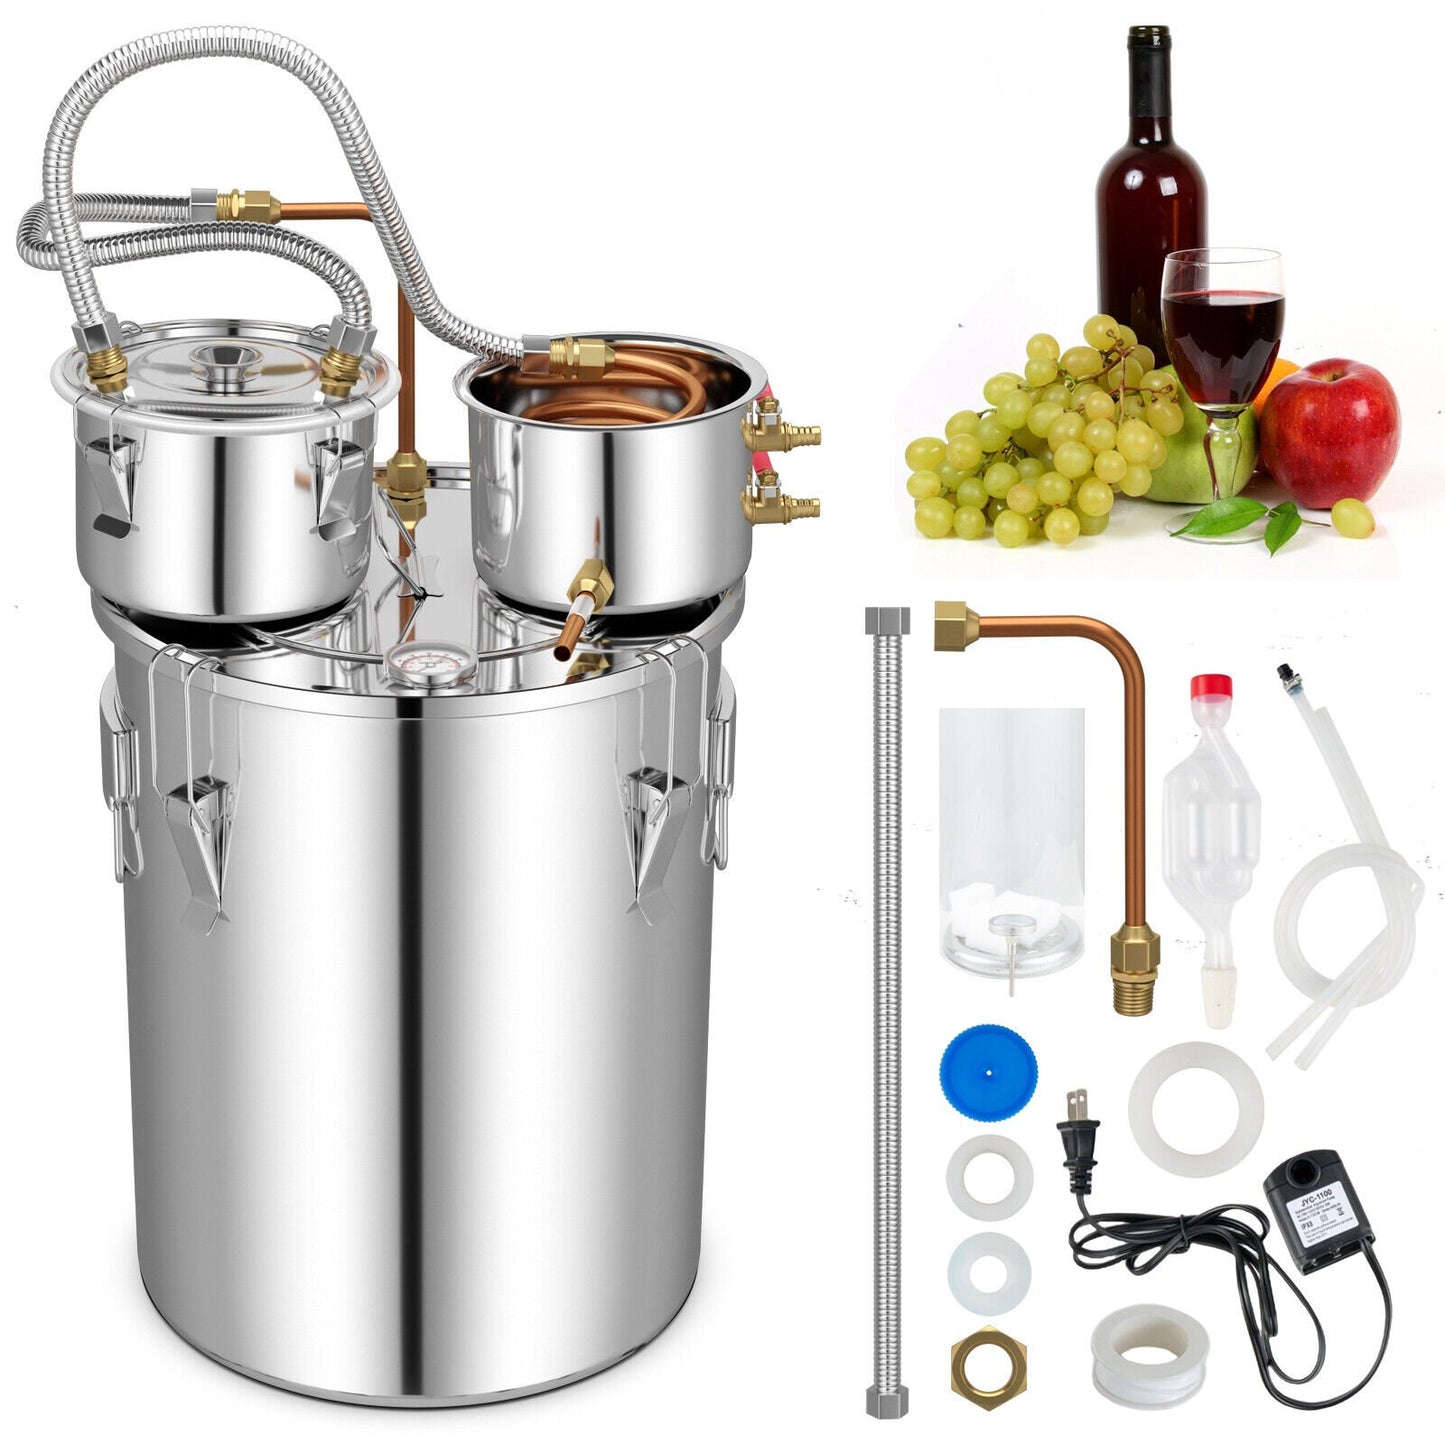 5/10 Gal 22/38 L Water Alcohol Distiller for DIY Whisky-10 Gal, Silver